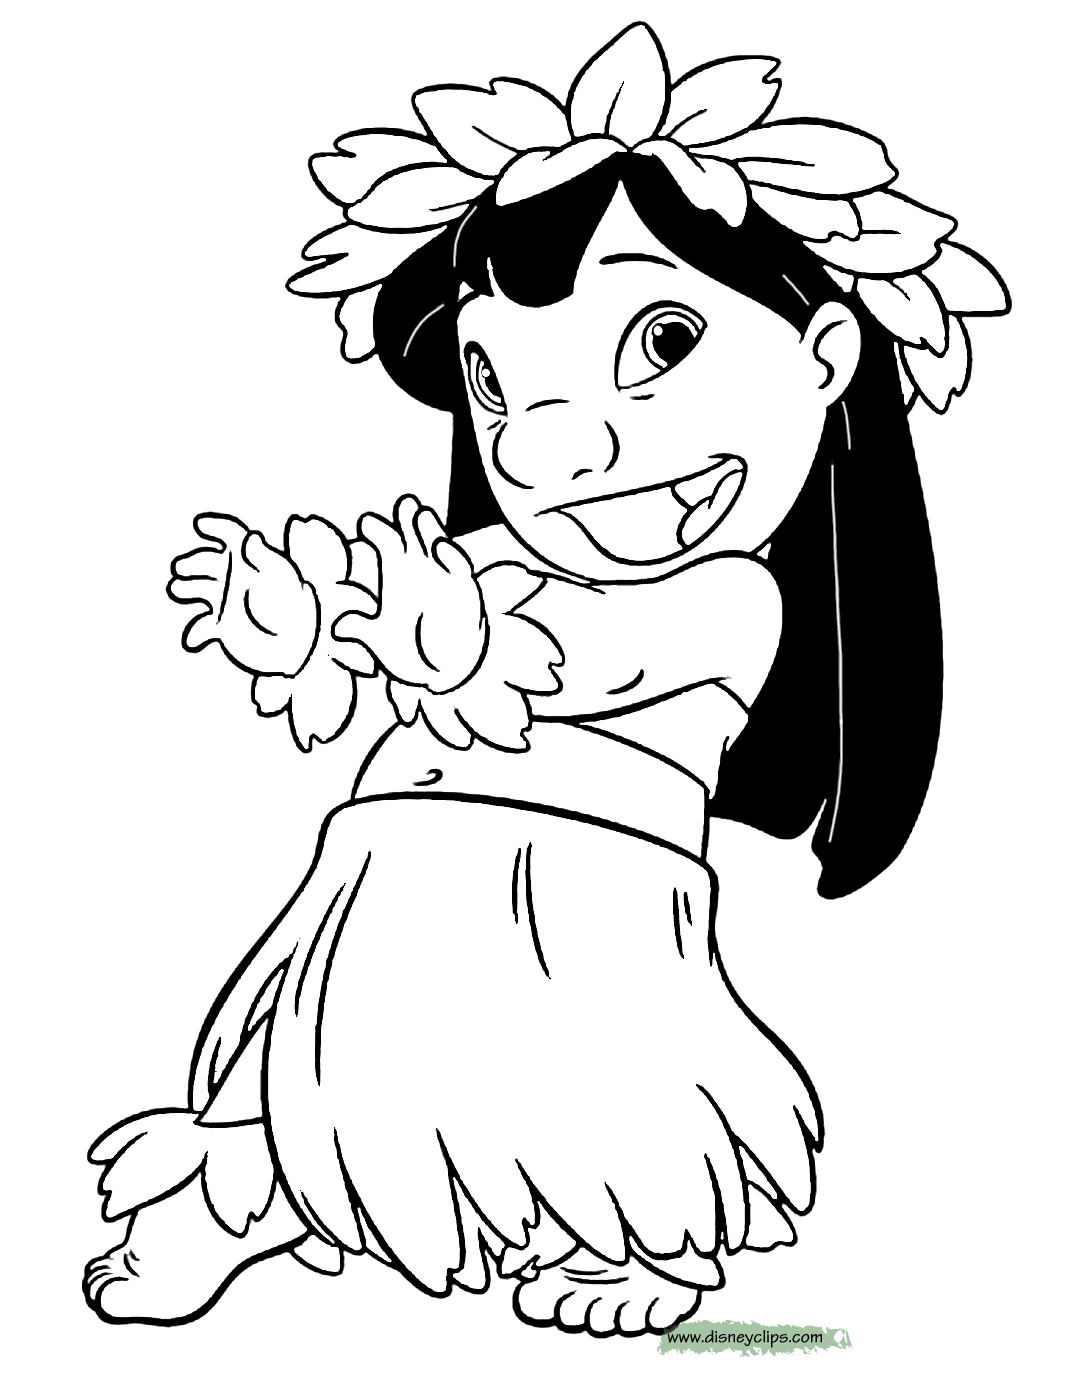 disney-lilo-and-stitch-coloring-pages-sketch-coloring-page